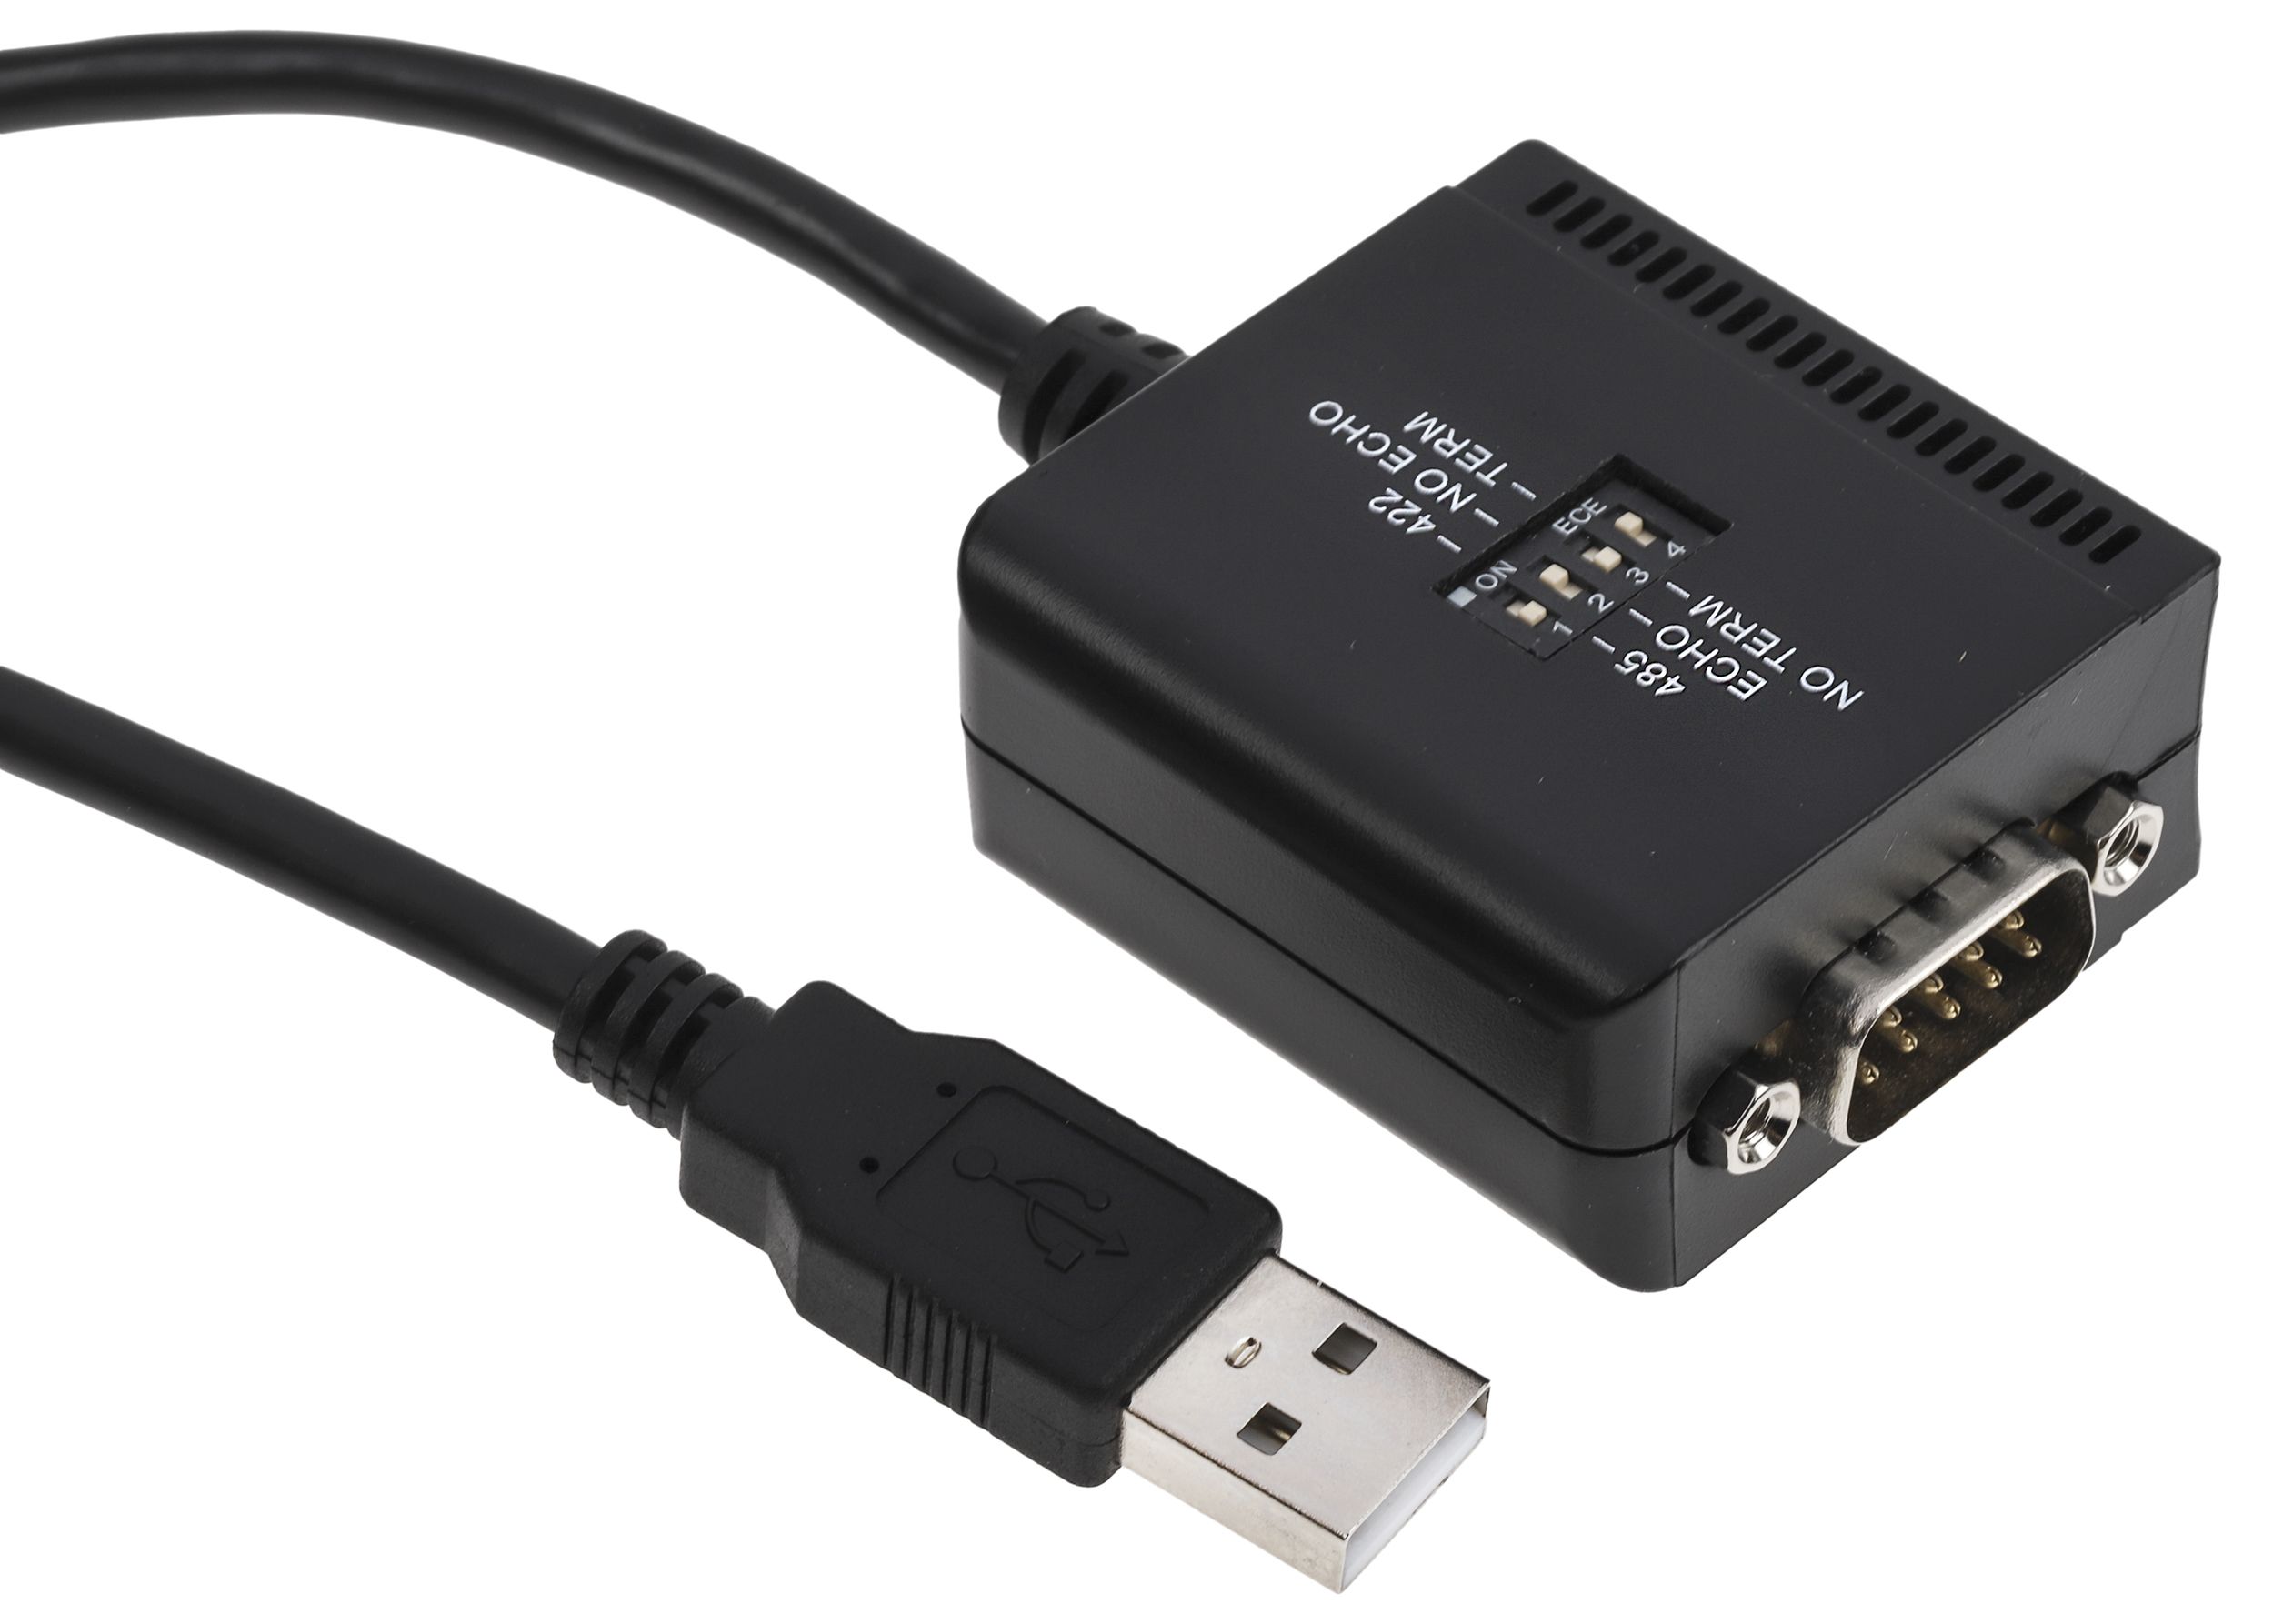 StarTech.com USB 2.0 to RS422 USB Serial Cable Adapter